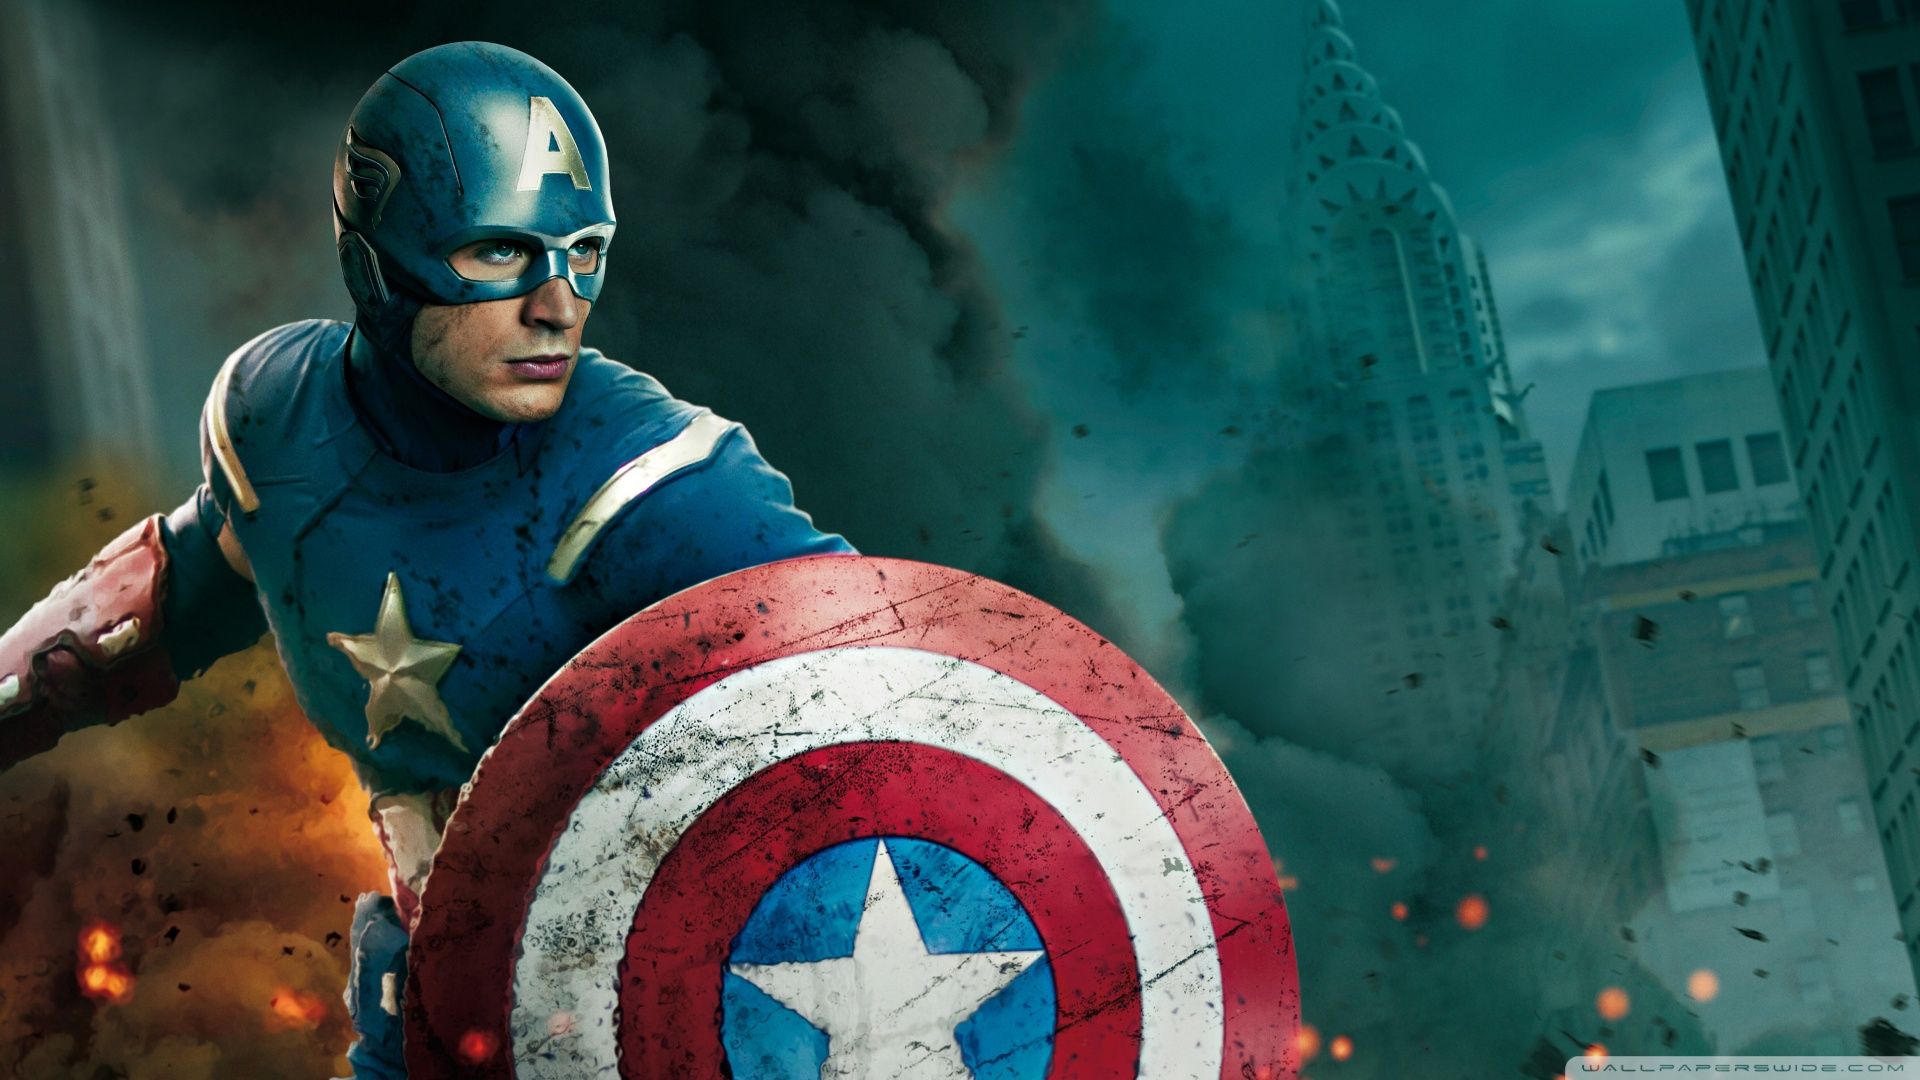 Download The Avengers Captain America And Thor Wallpaper 1920x1080